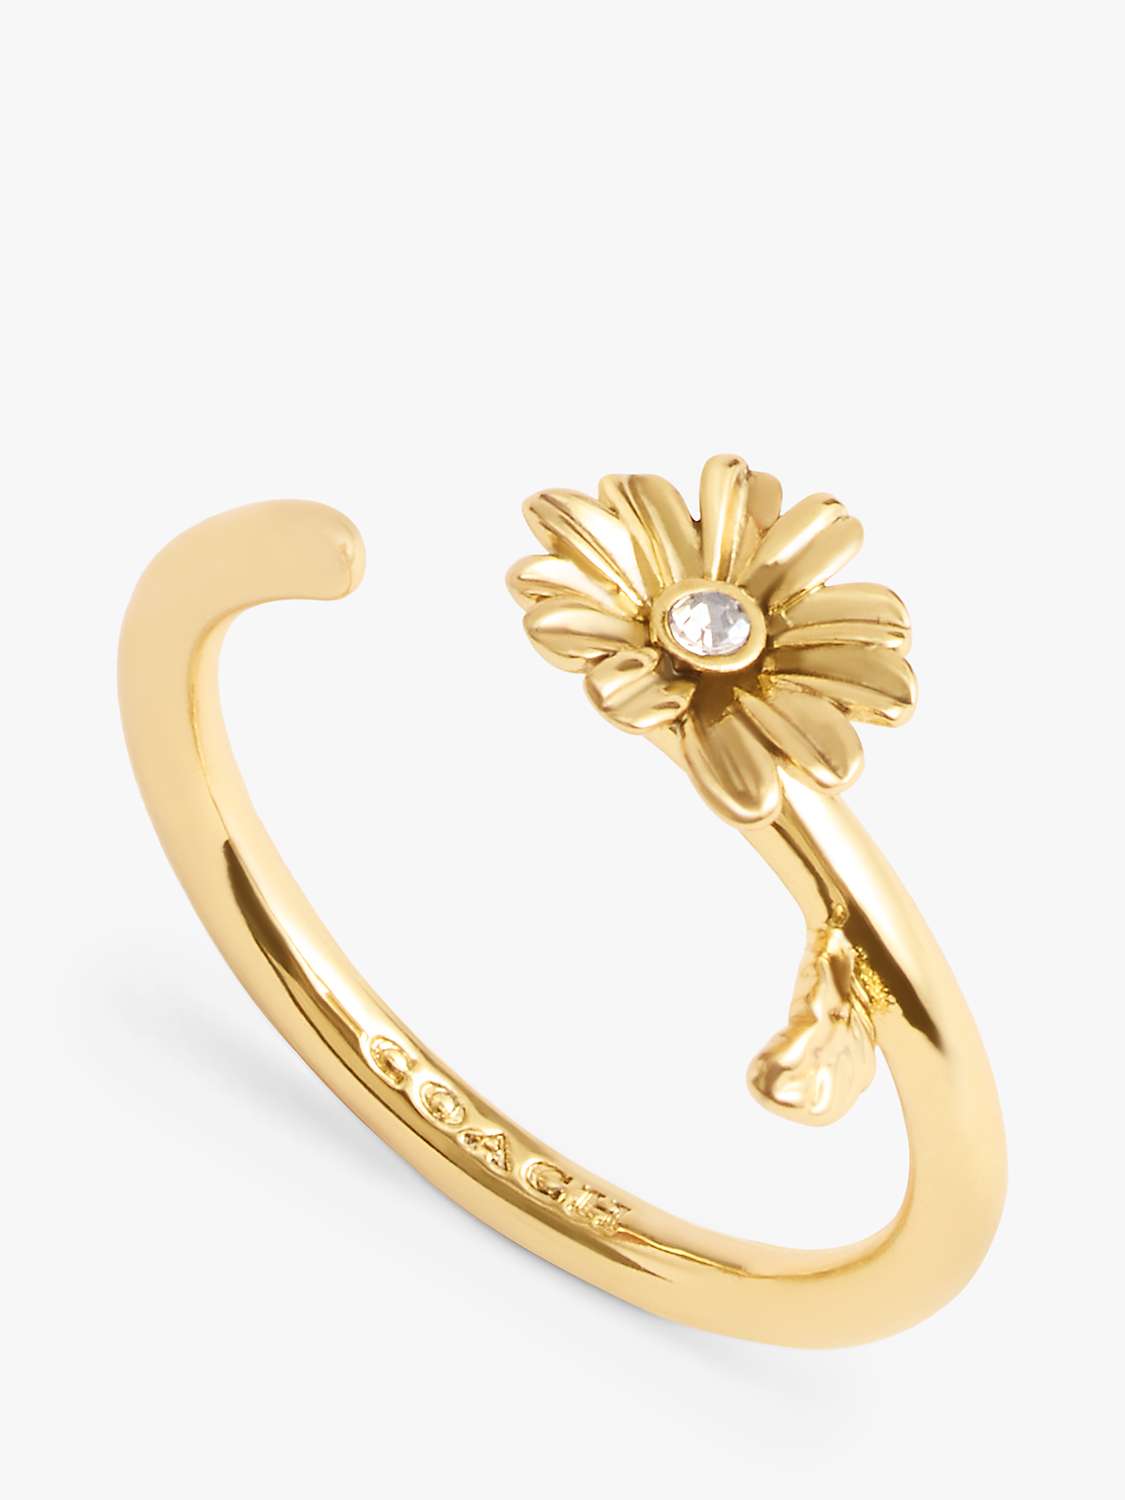 Buy Coach Daisy Floral Open Ring, Gold Online at johnlewis.com